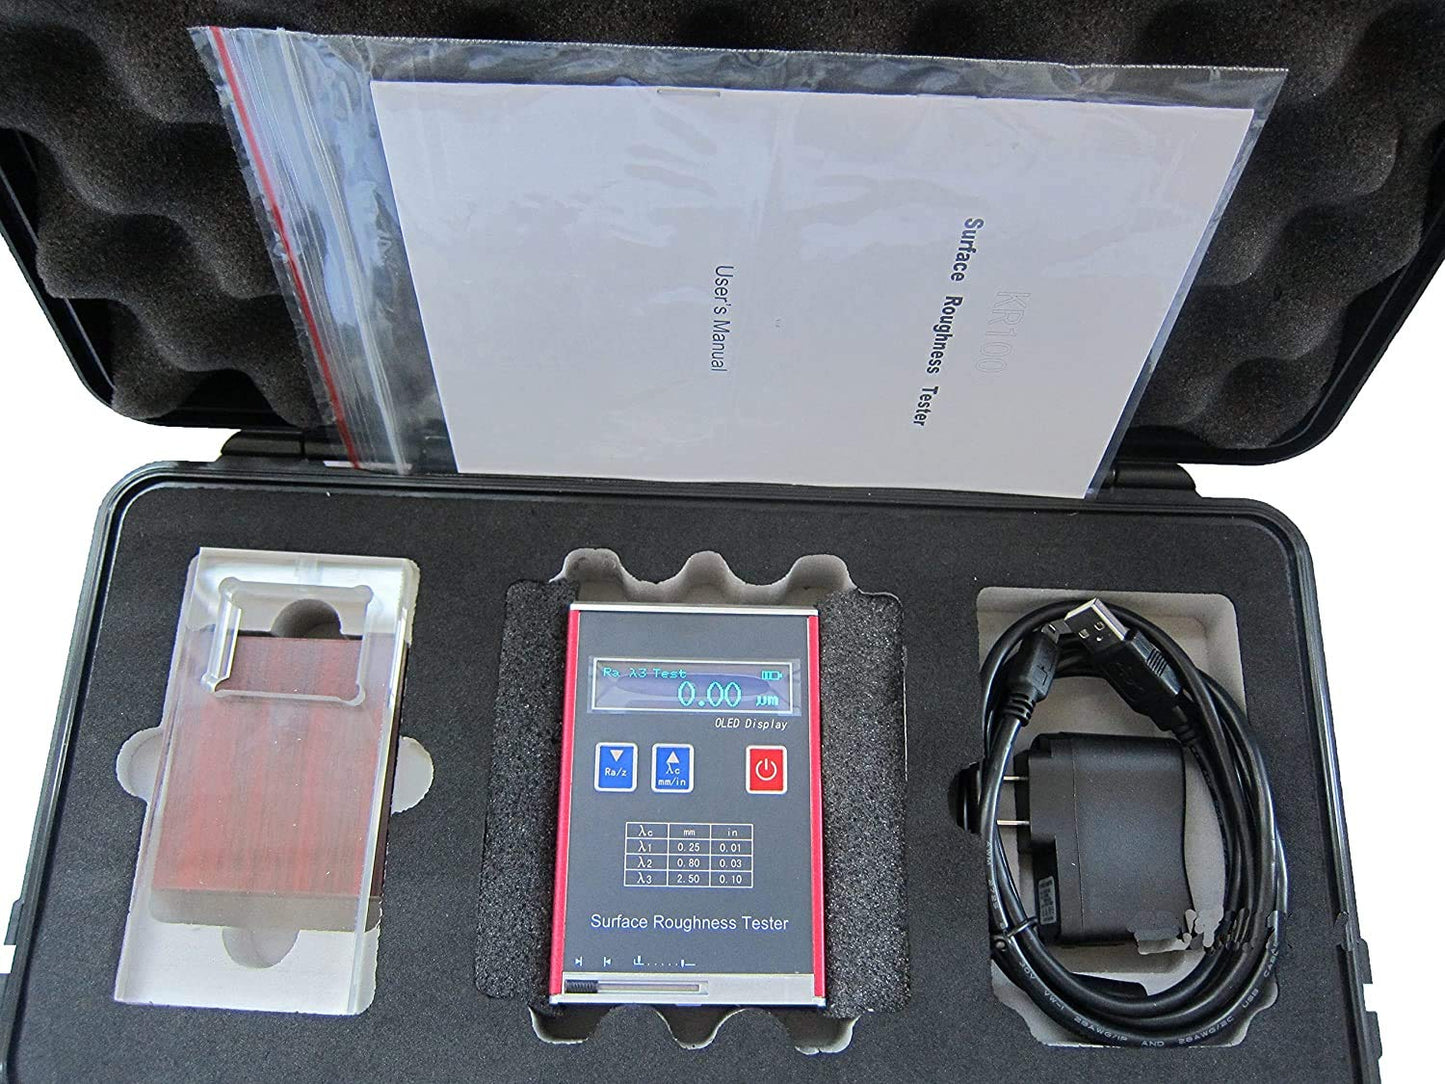 VTSYIQI Surface Roughness Tester Meter Surface Detection on Metal Non-Metal Ra 0.05 to 15.0um Rz 0.1 to 50um USB Data Output